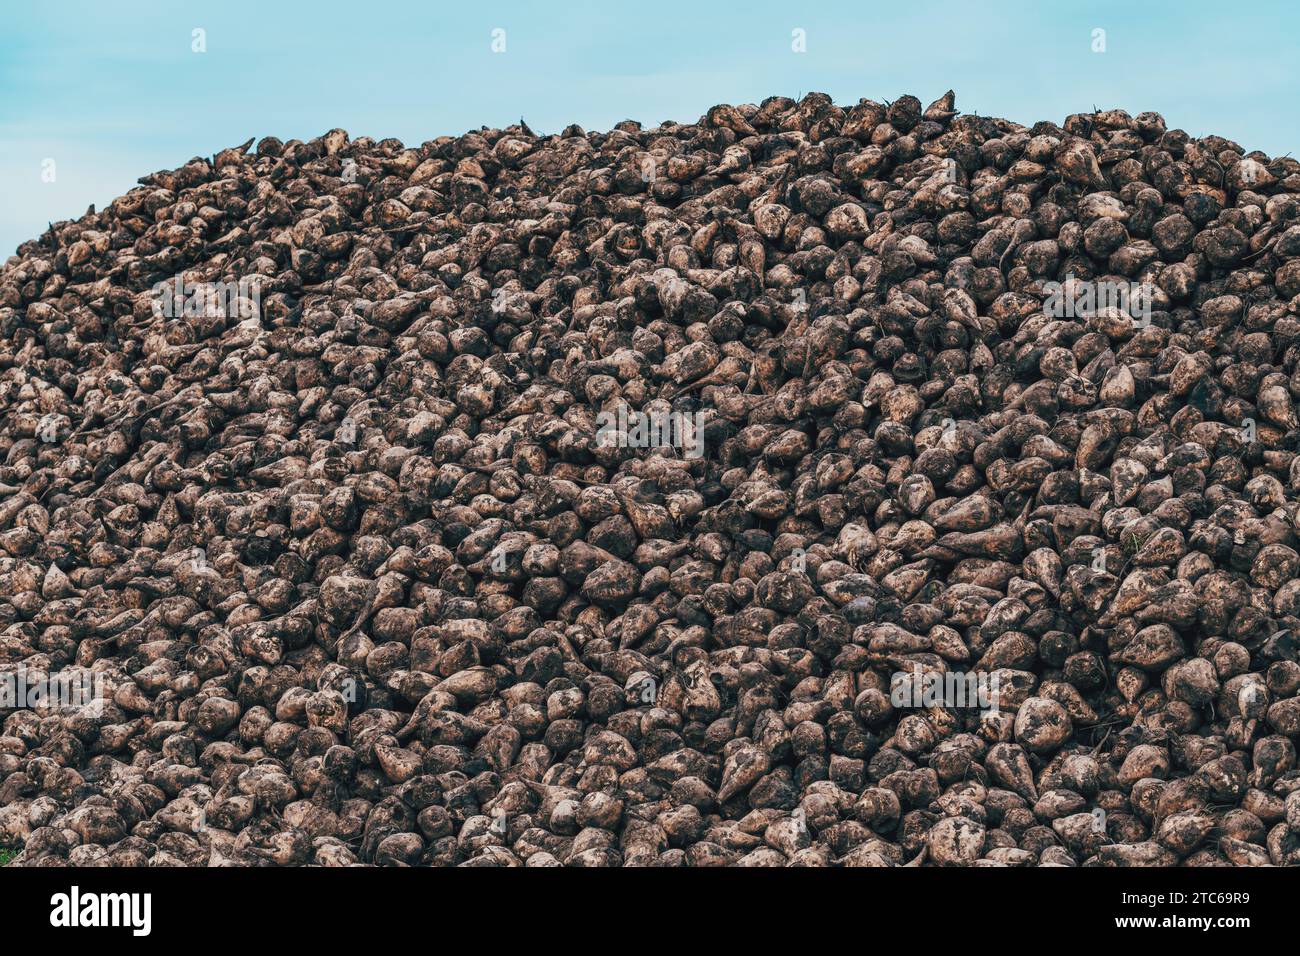 Pile of harvested sugar beet root crops in the field, selective focus Stock Photo